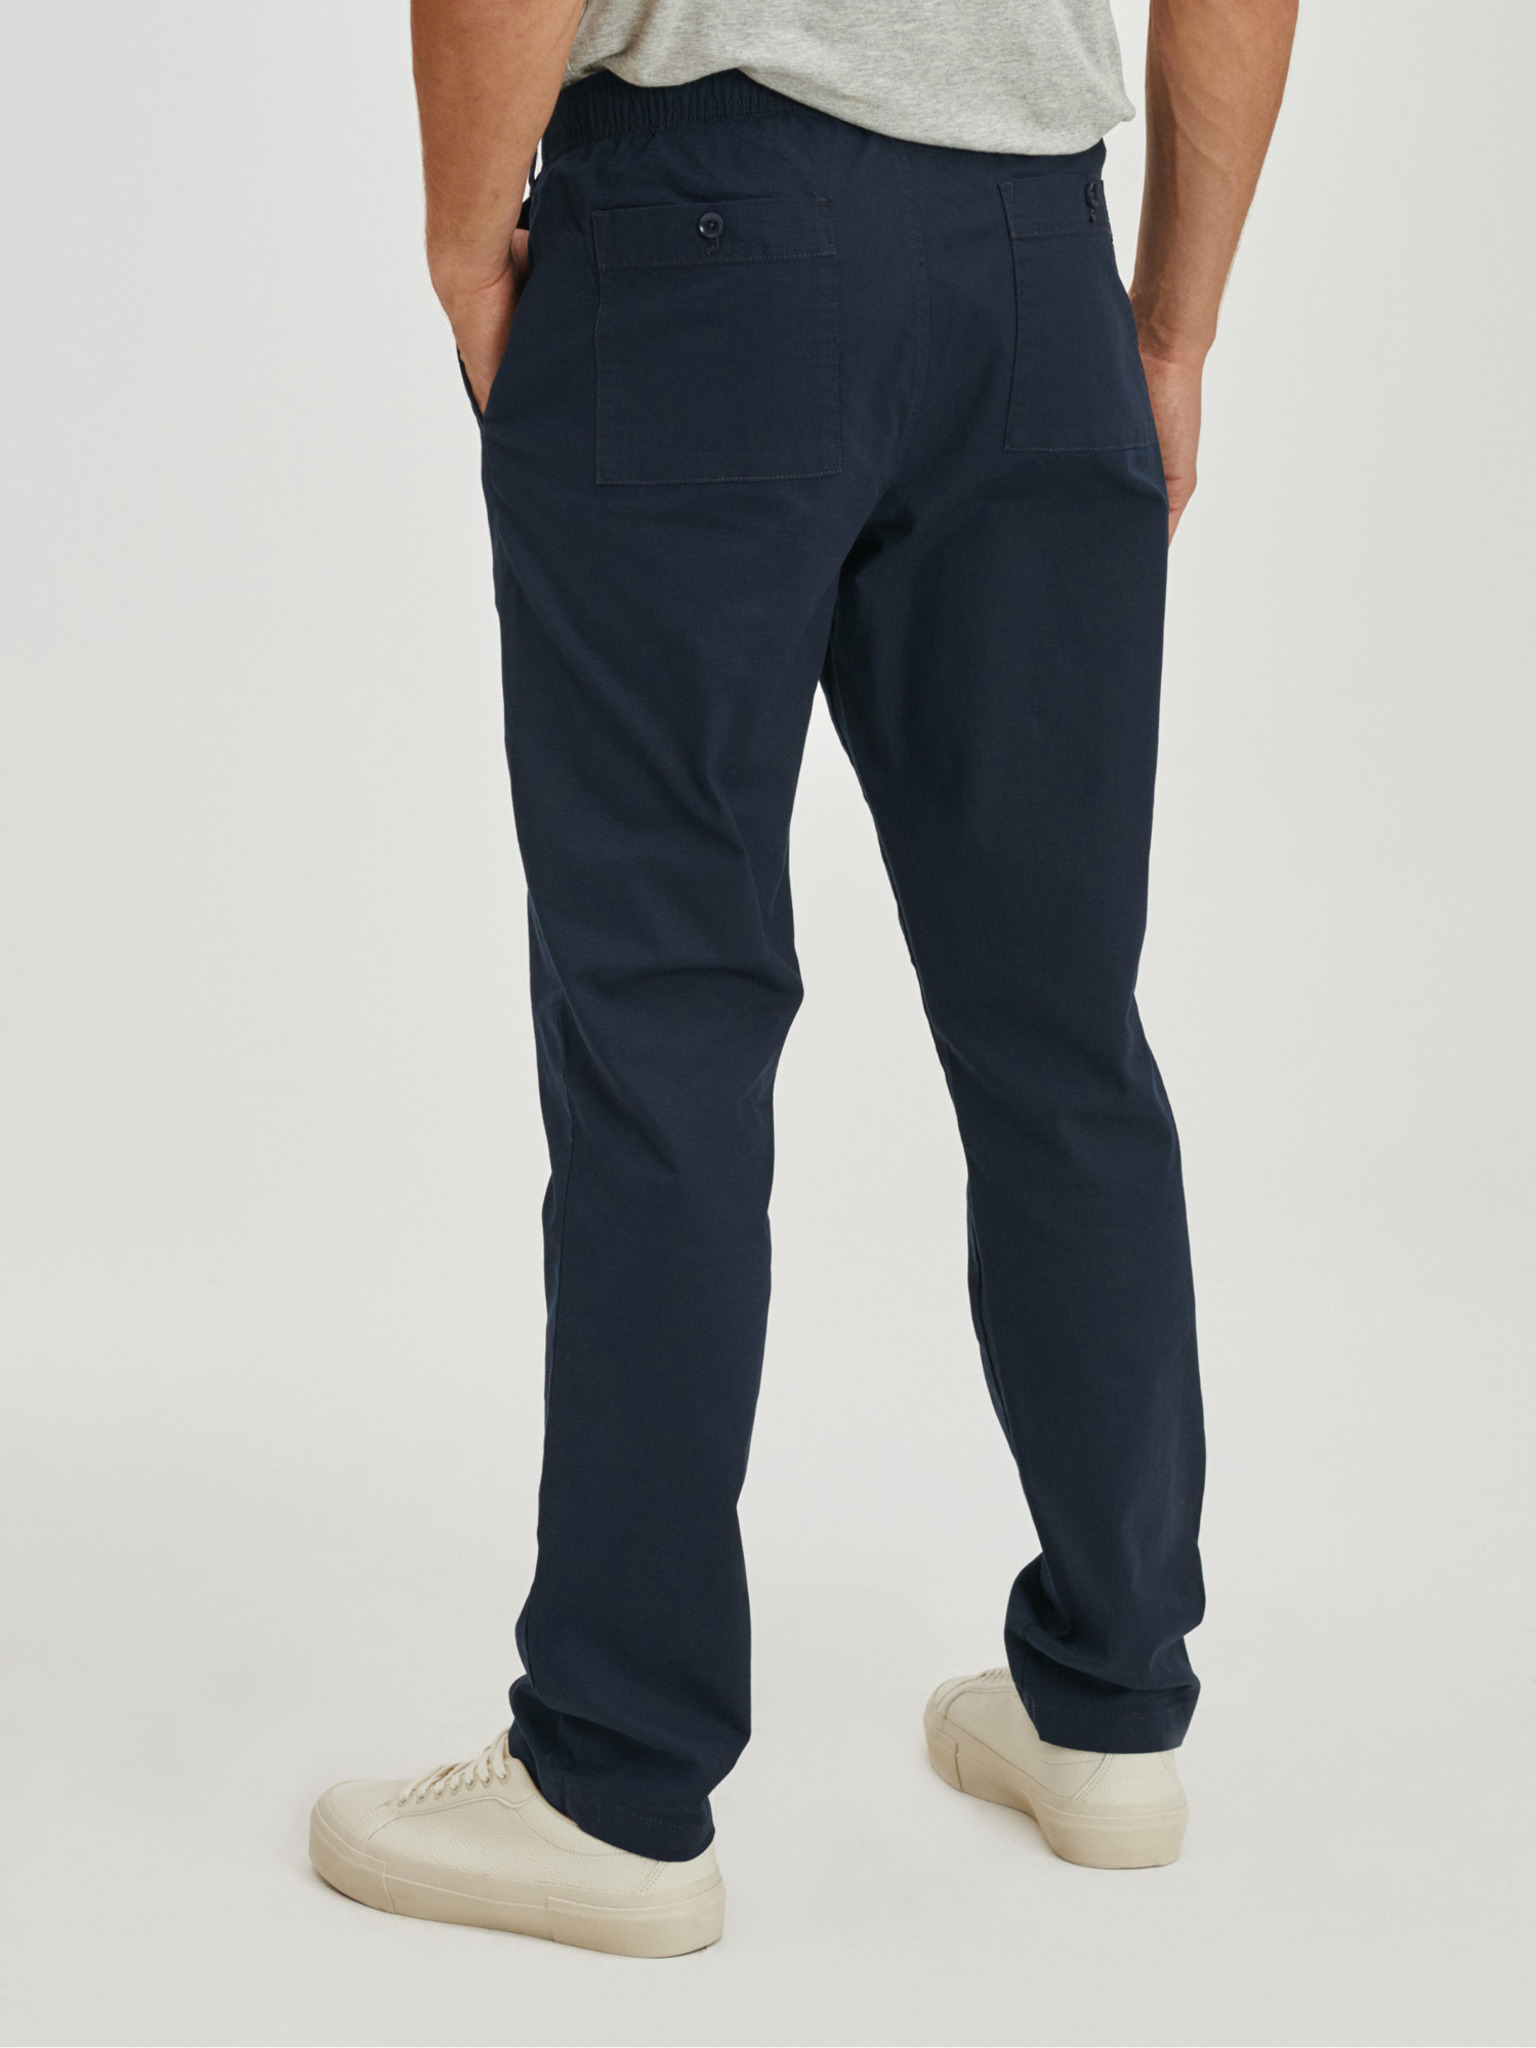 Buy Gap Relaxed Utility Cargo Trousers from the Gap online shop